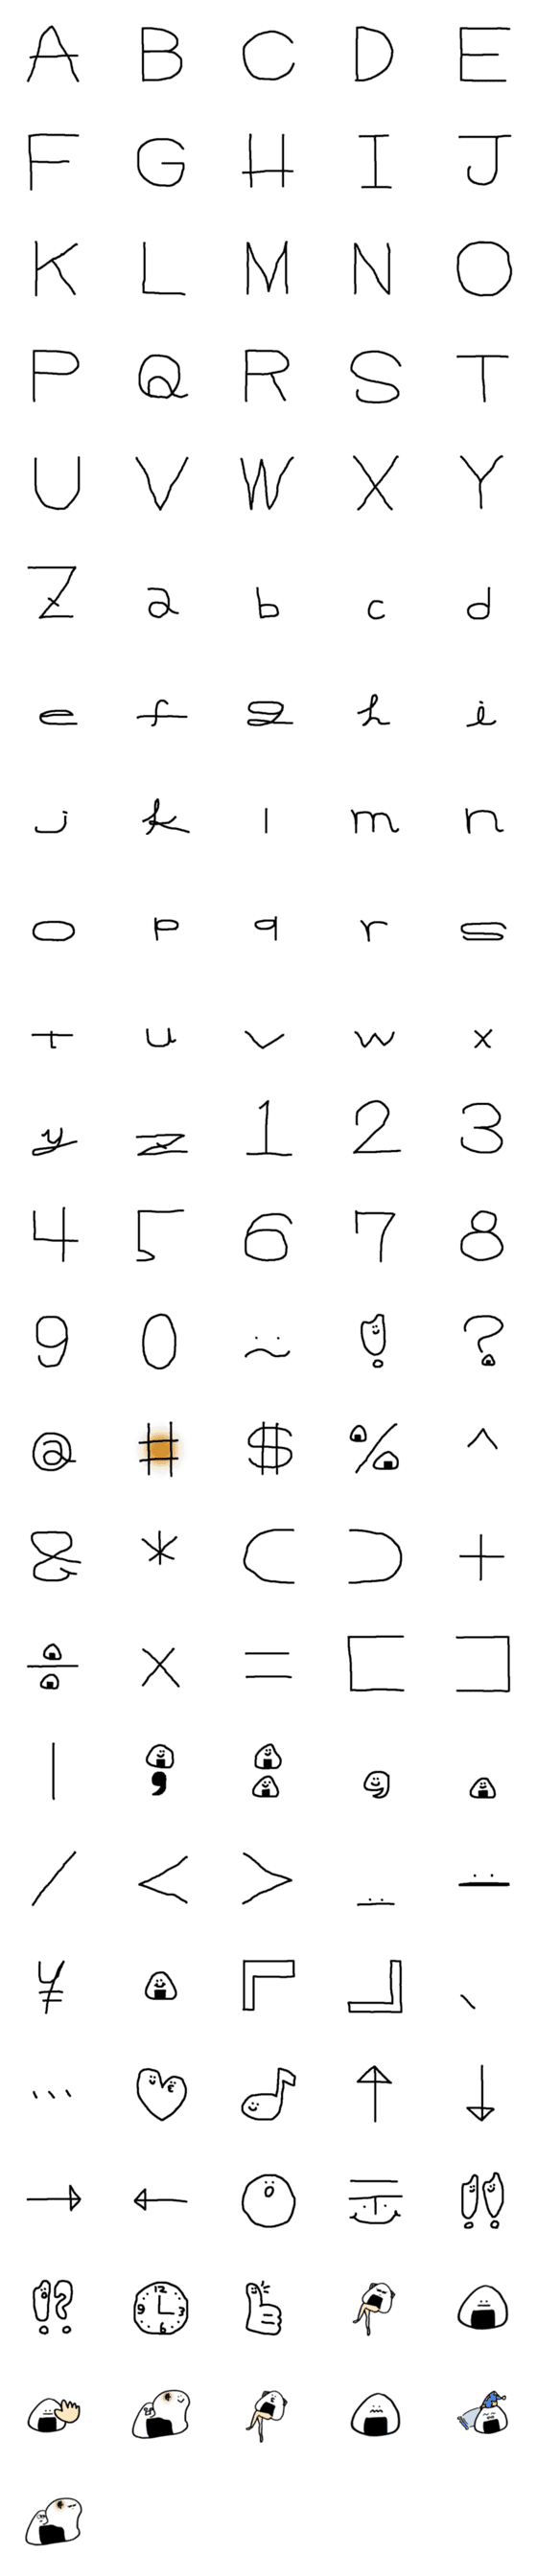 [LINE絵文字]chanko文字 ABC verの画像一覧